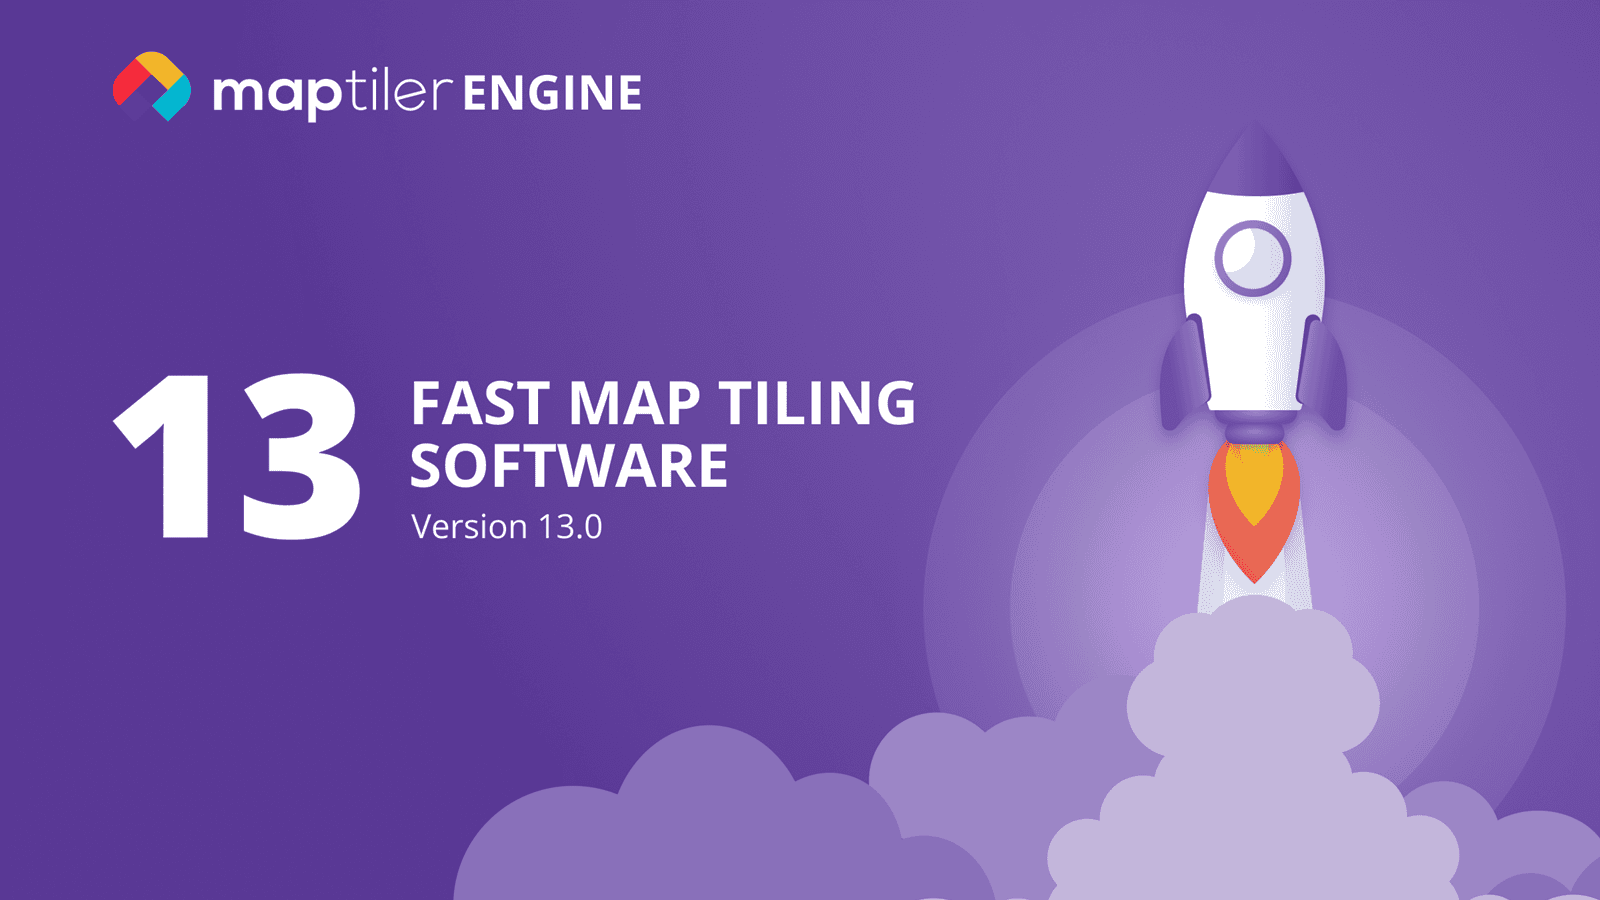 Faster map tiling with the new MapTiler Engine 13 image